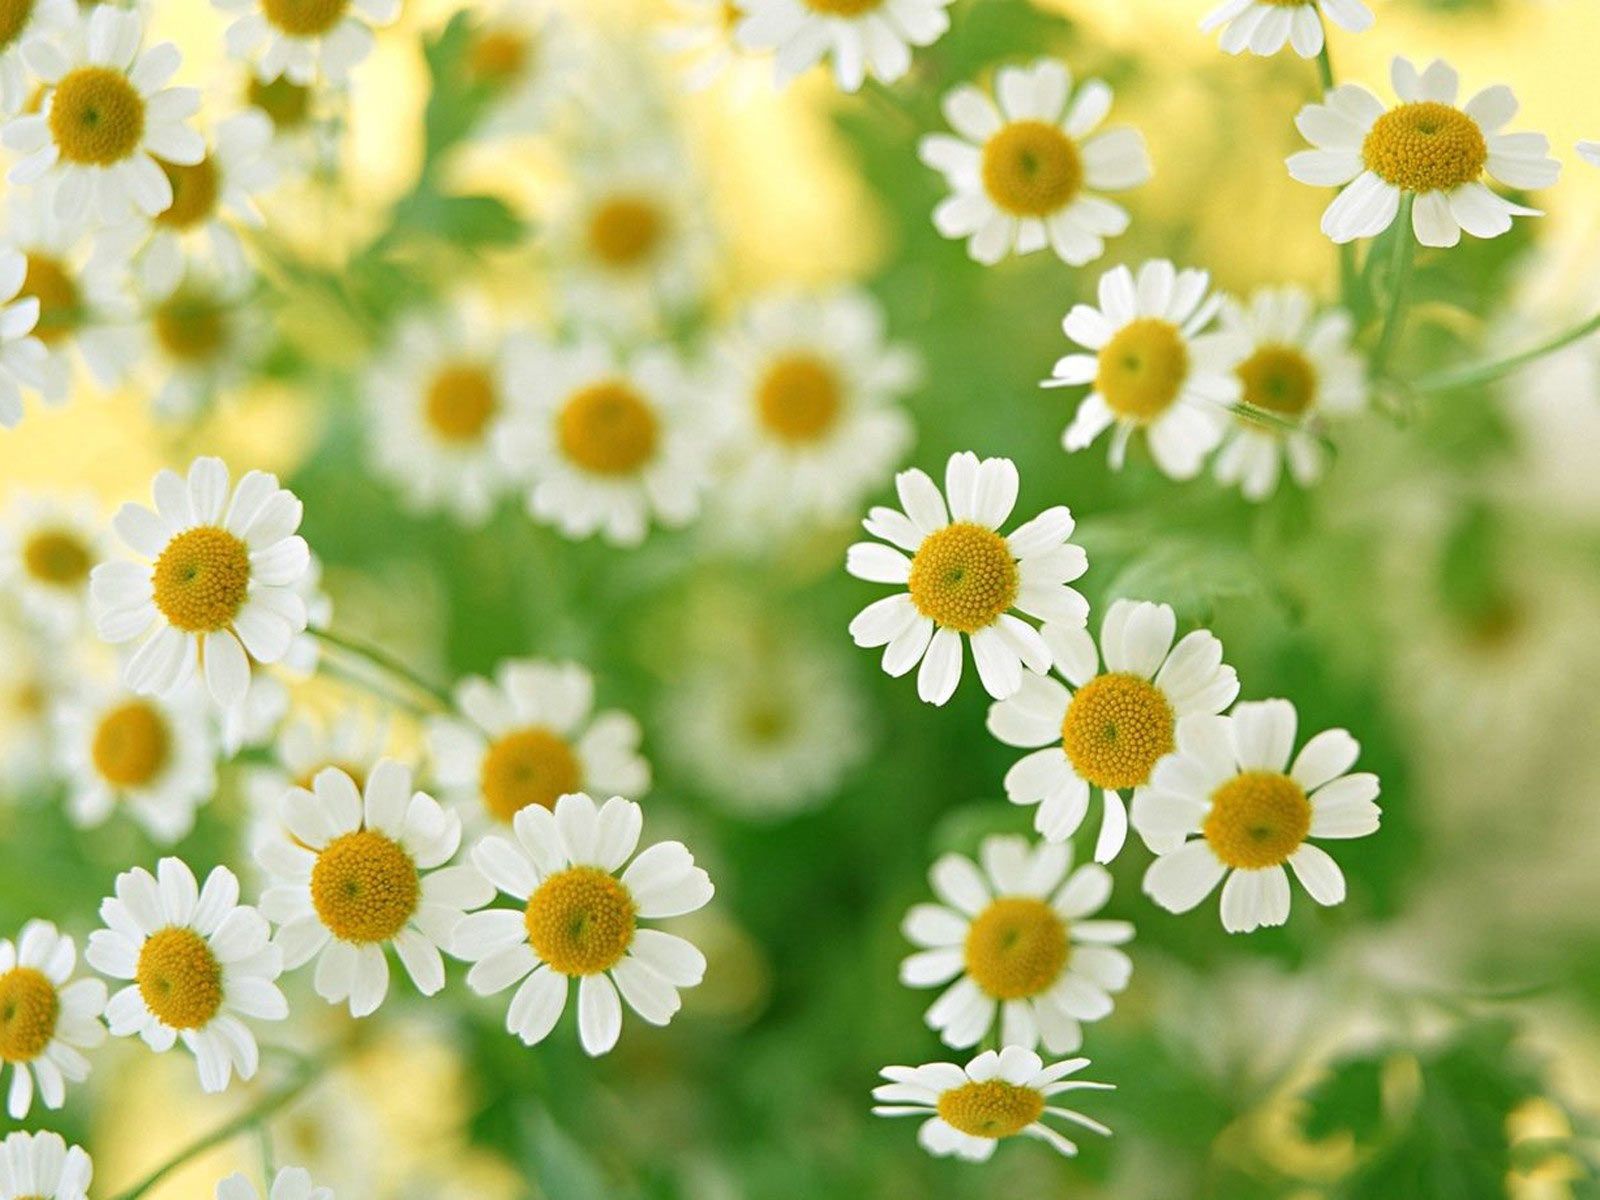 Daisy HD Picture Wallpapers 9909 - HD Wallpapers Site